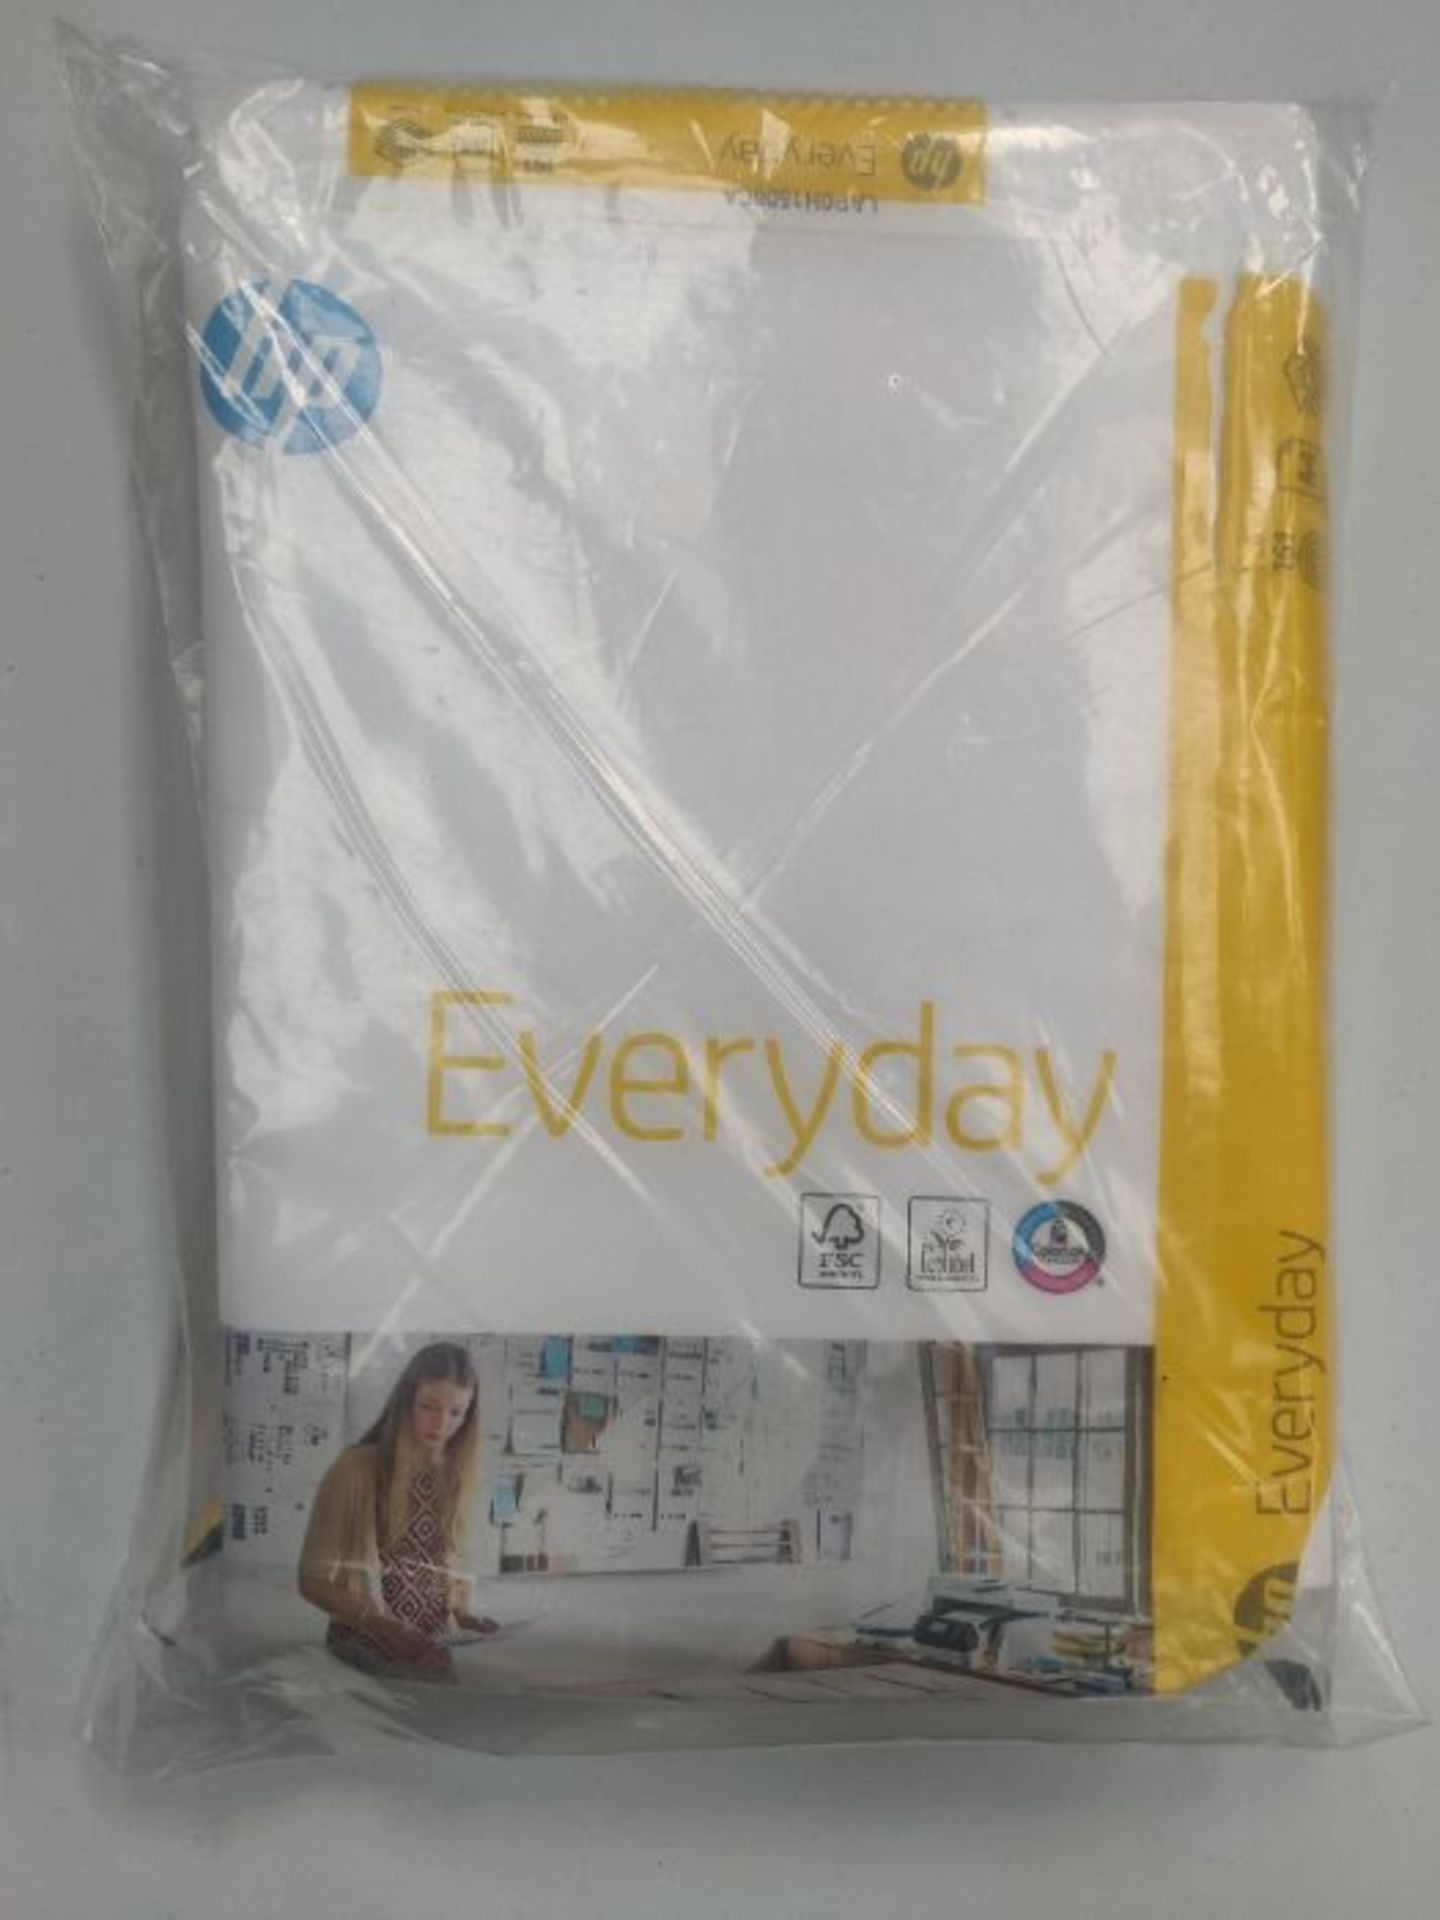 HP Printer Paper, Everyday A4 Paper, 210x297mm, 75gsm, 1 Ream, 500 Sheets - FSC Certif - Image 2 of 2